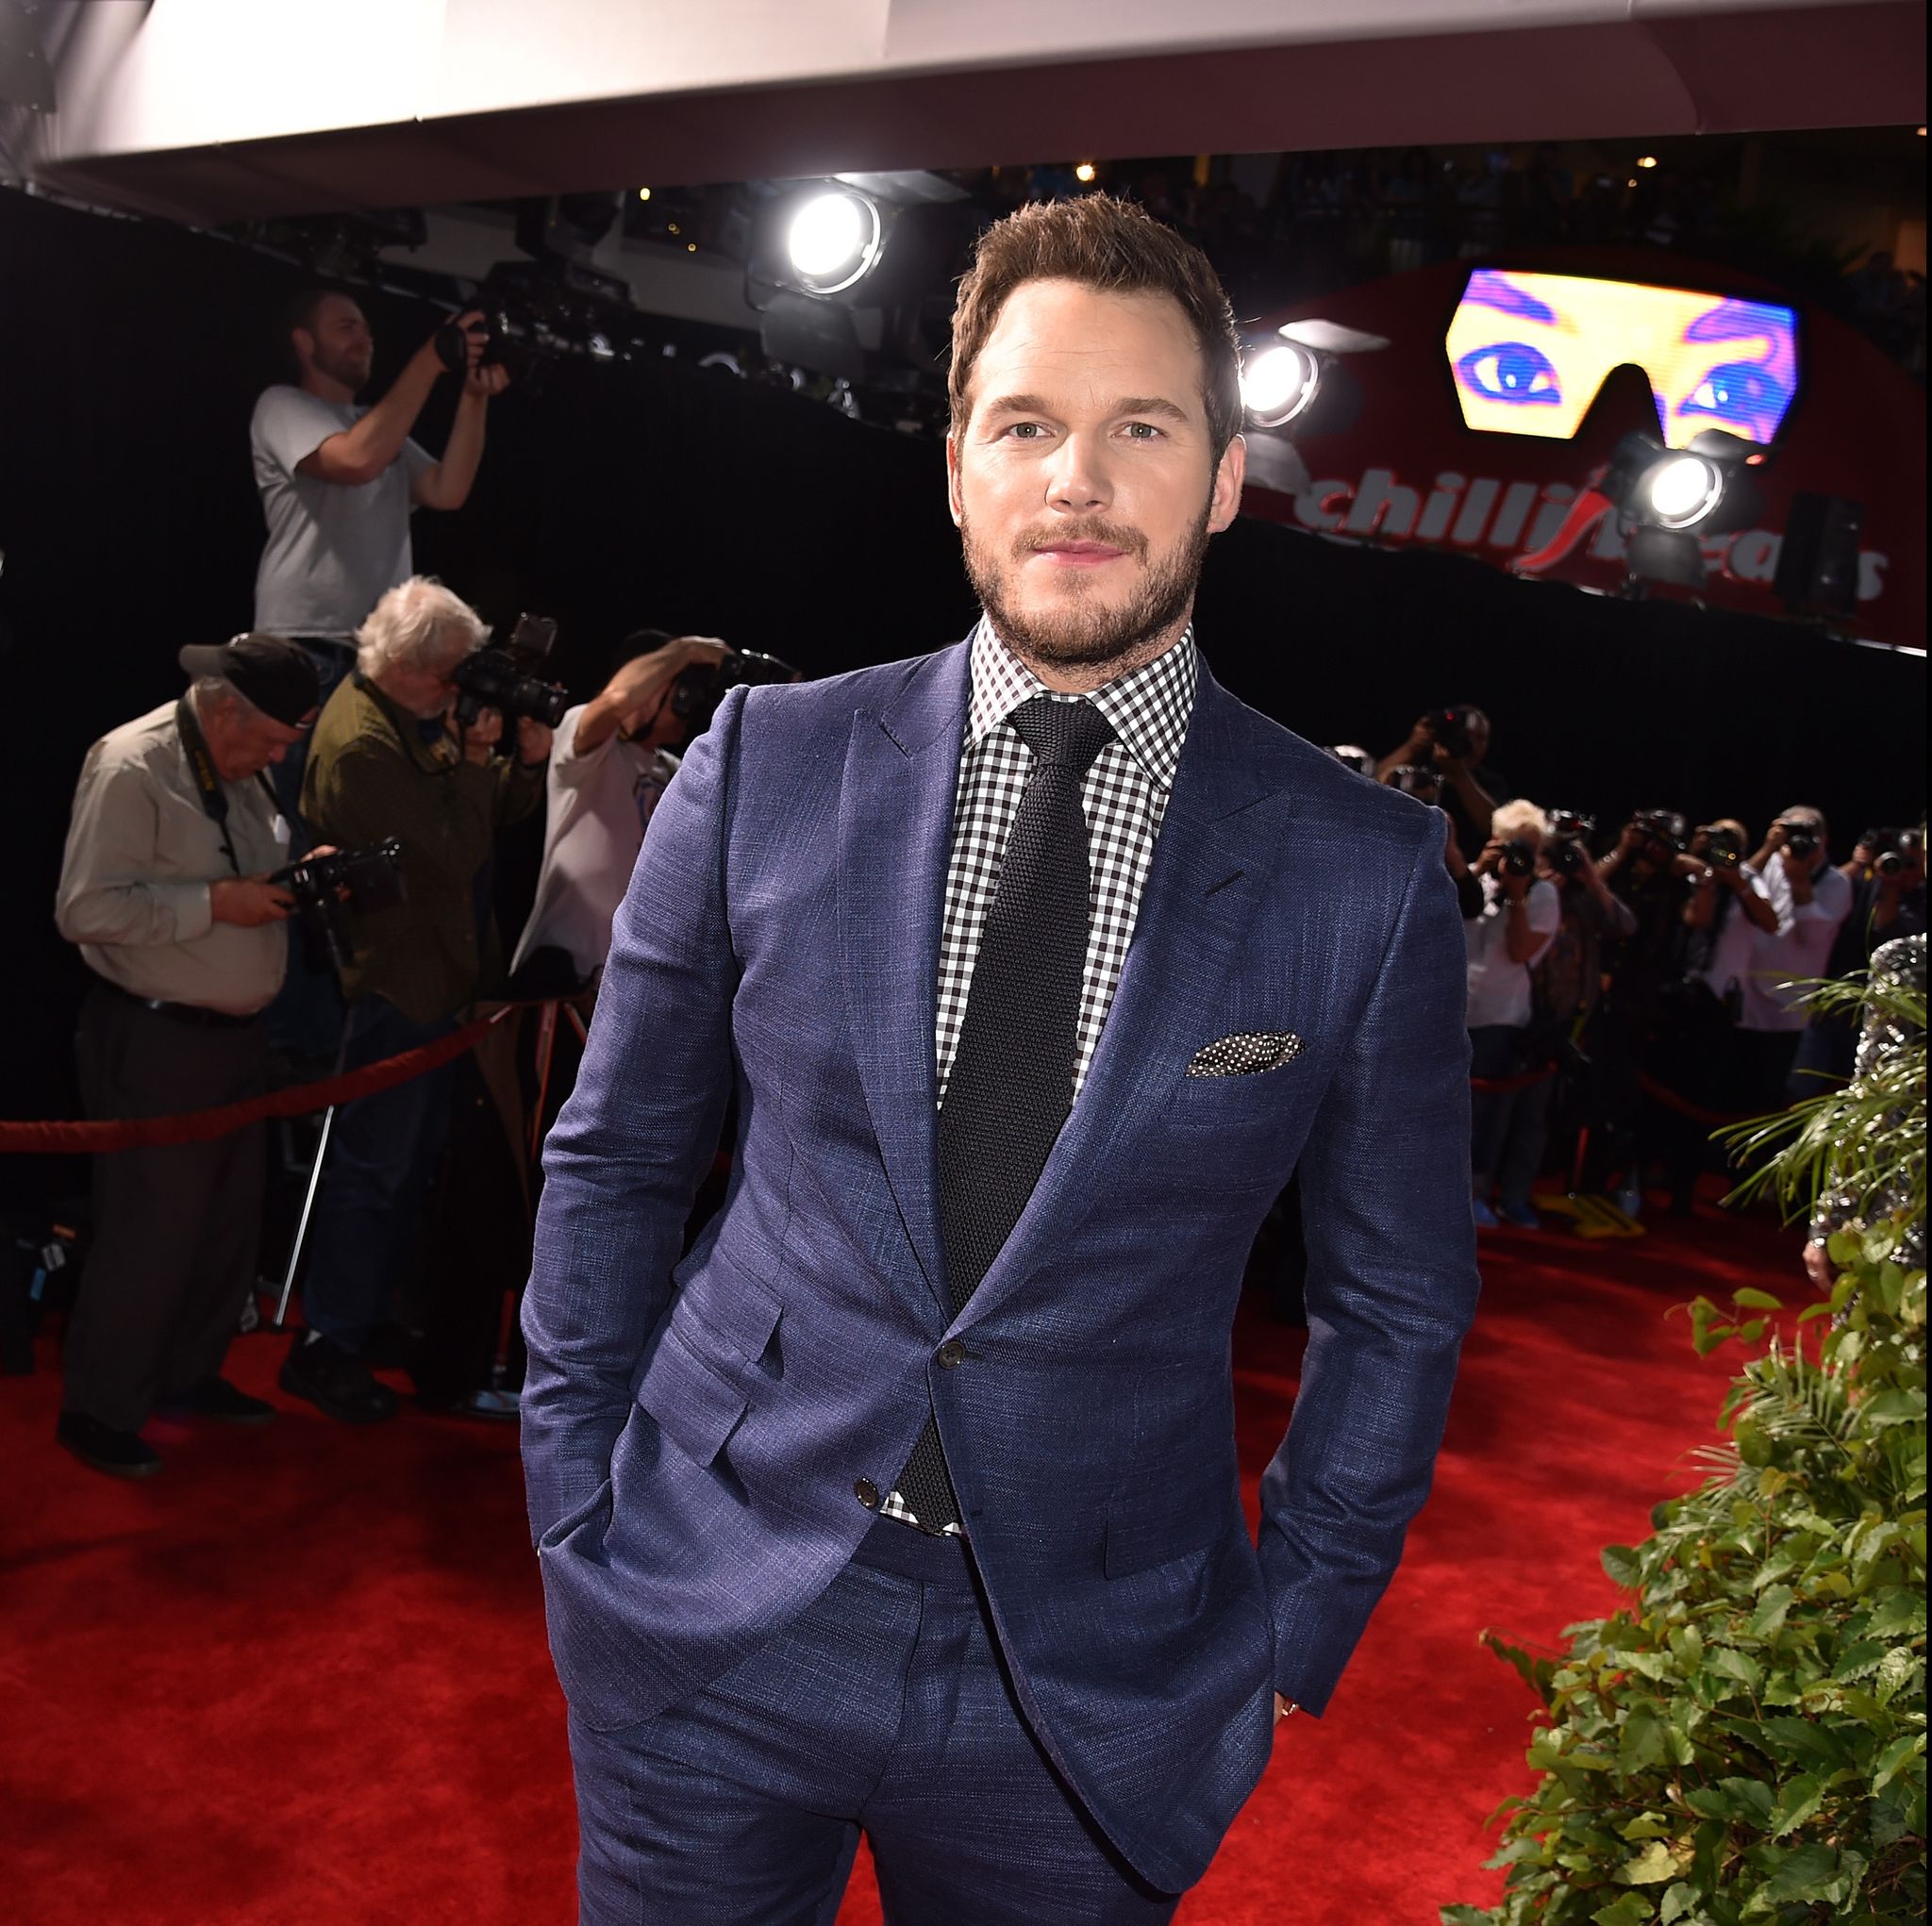 Premiere Of Universal Pictures' 'Jurassic World' - Red Carpet